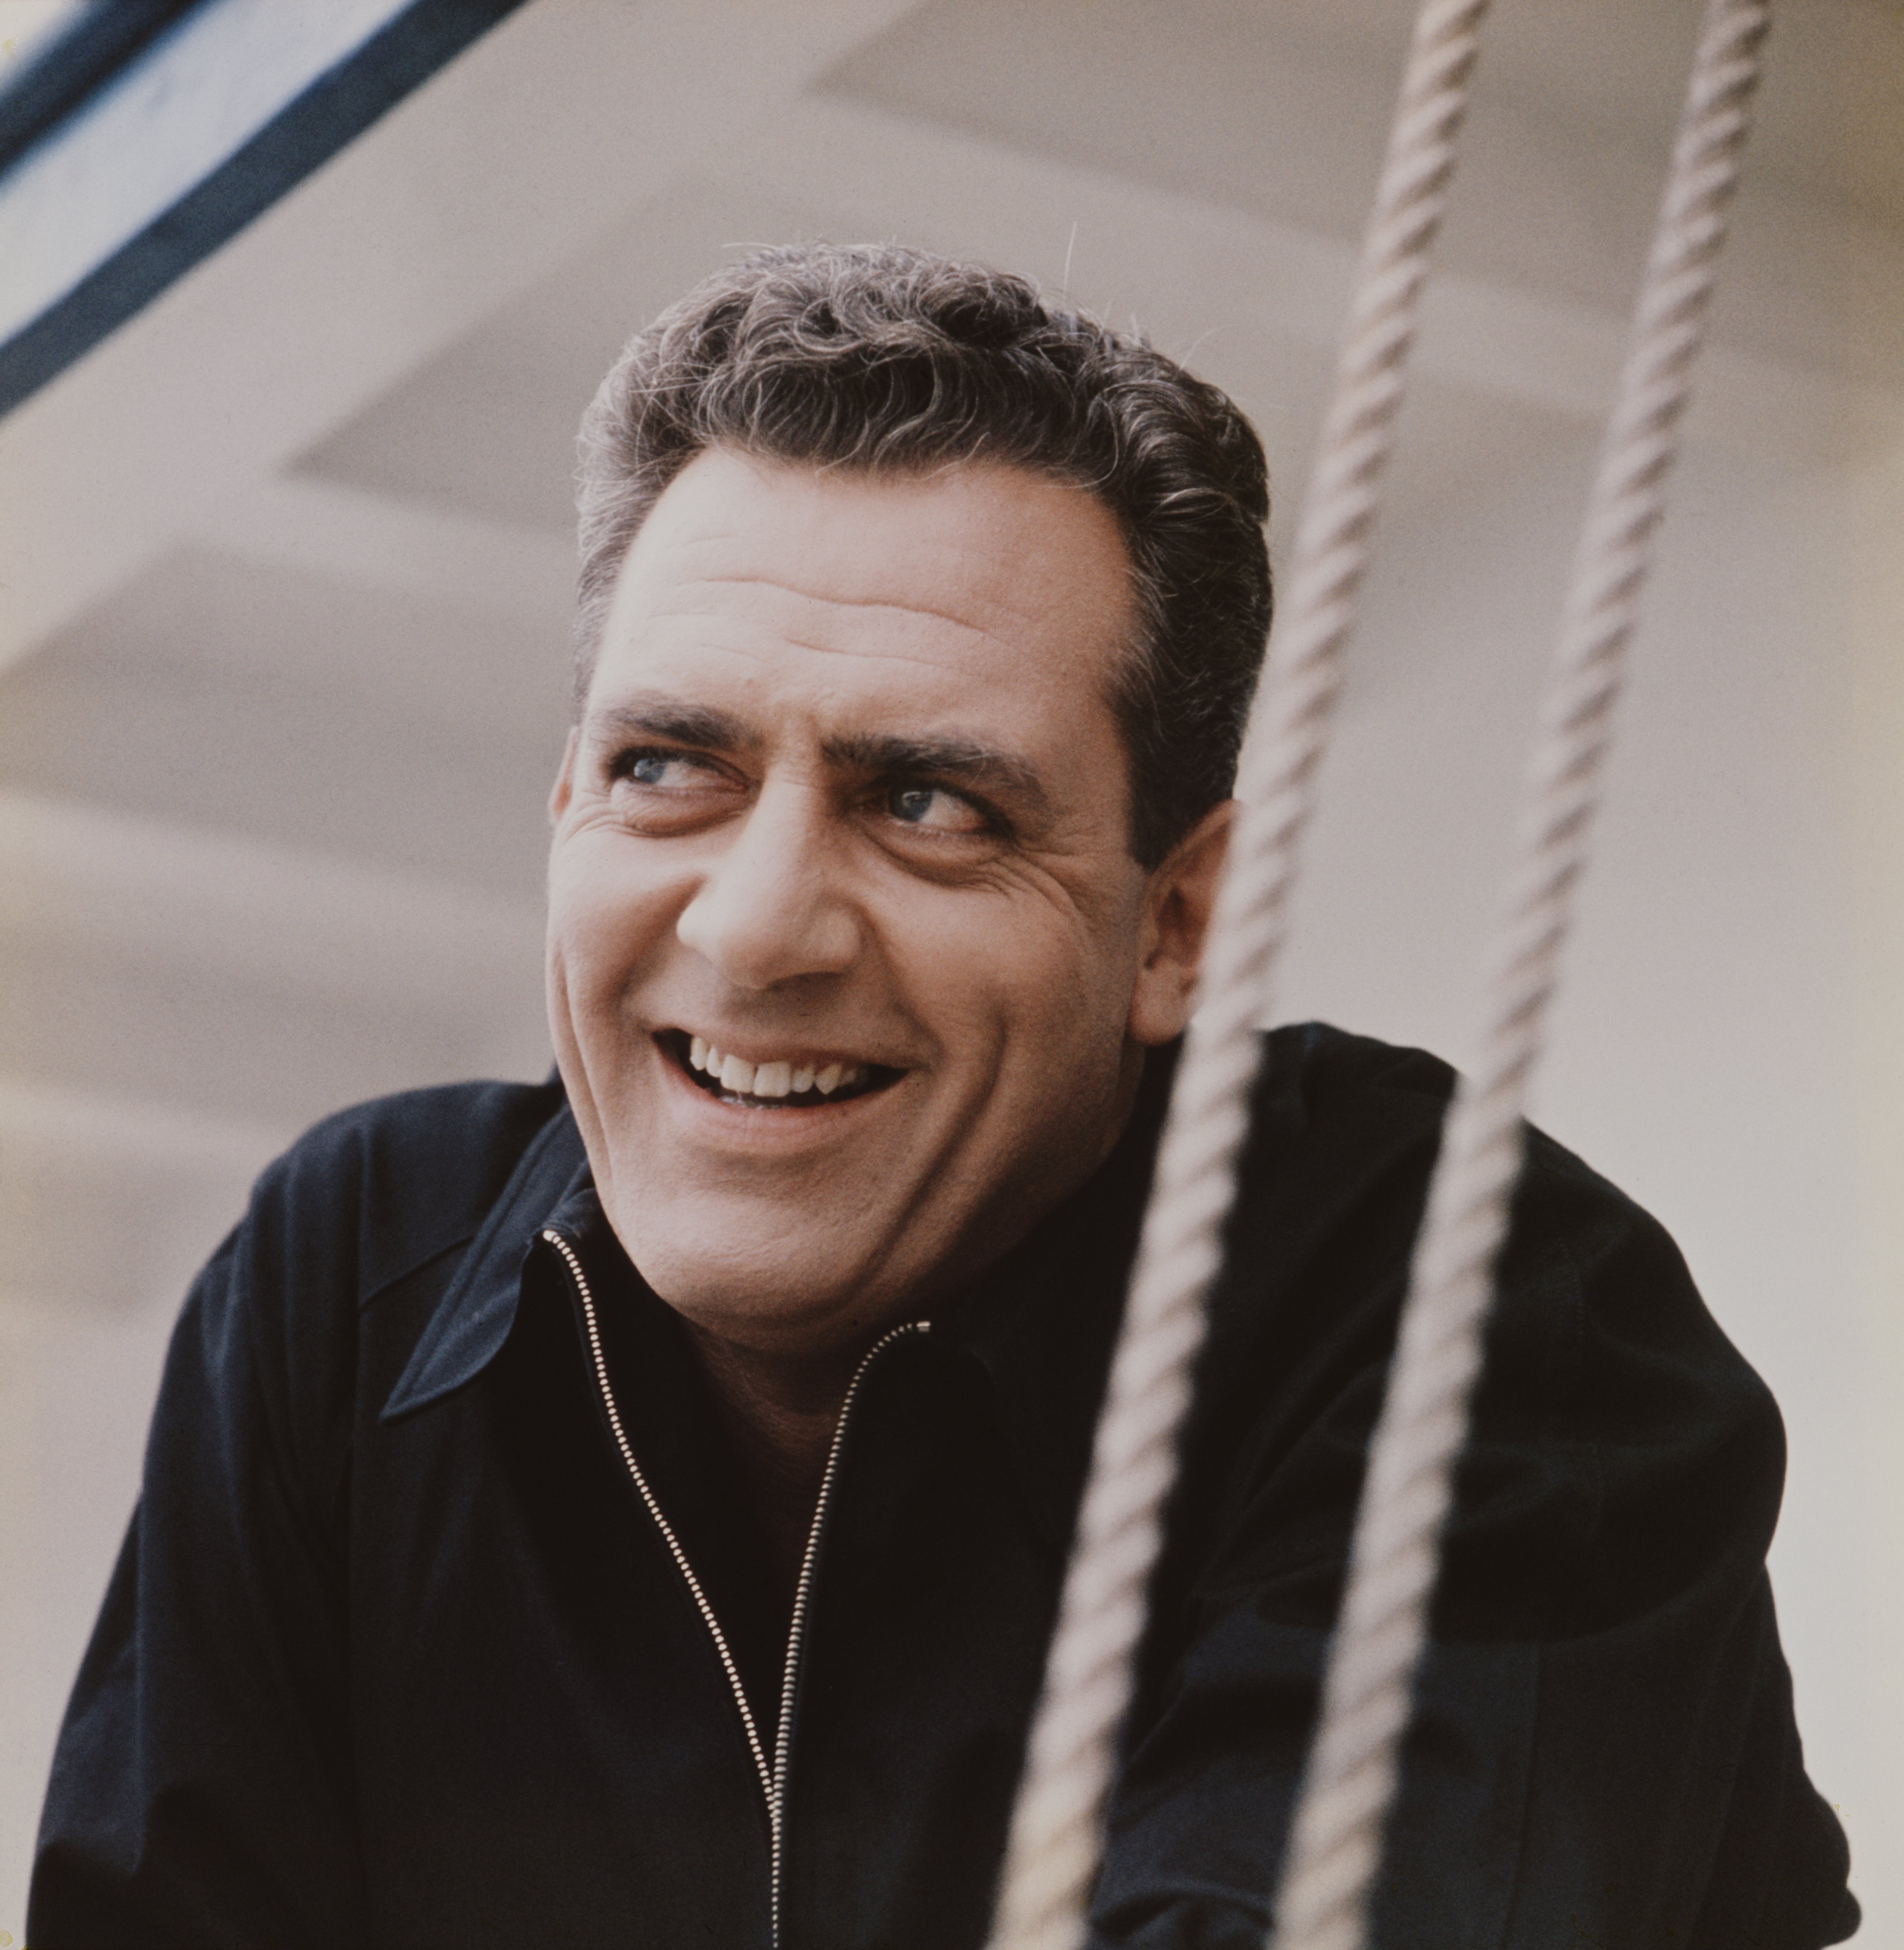 Raymond Burr pictured smiling in a black jacket on January 1, 1962┃Source: Getty Images